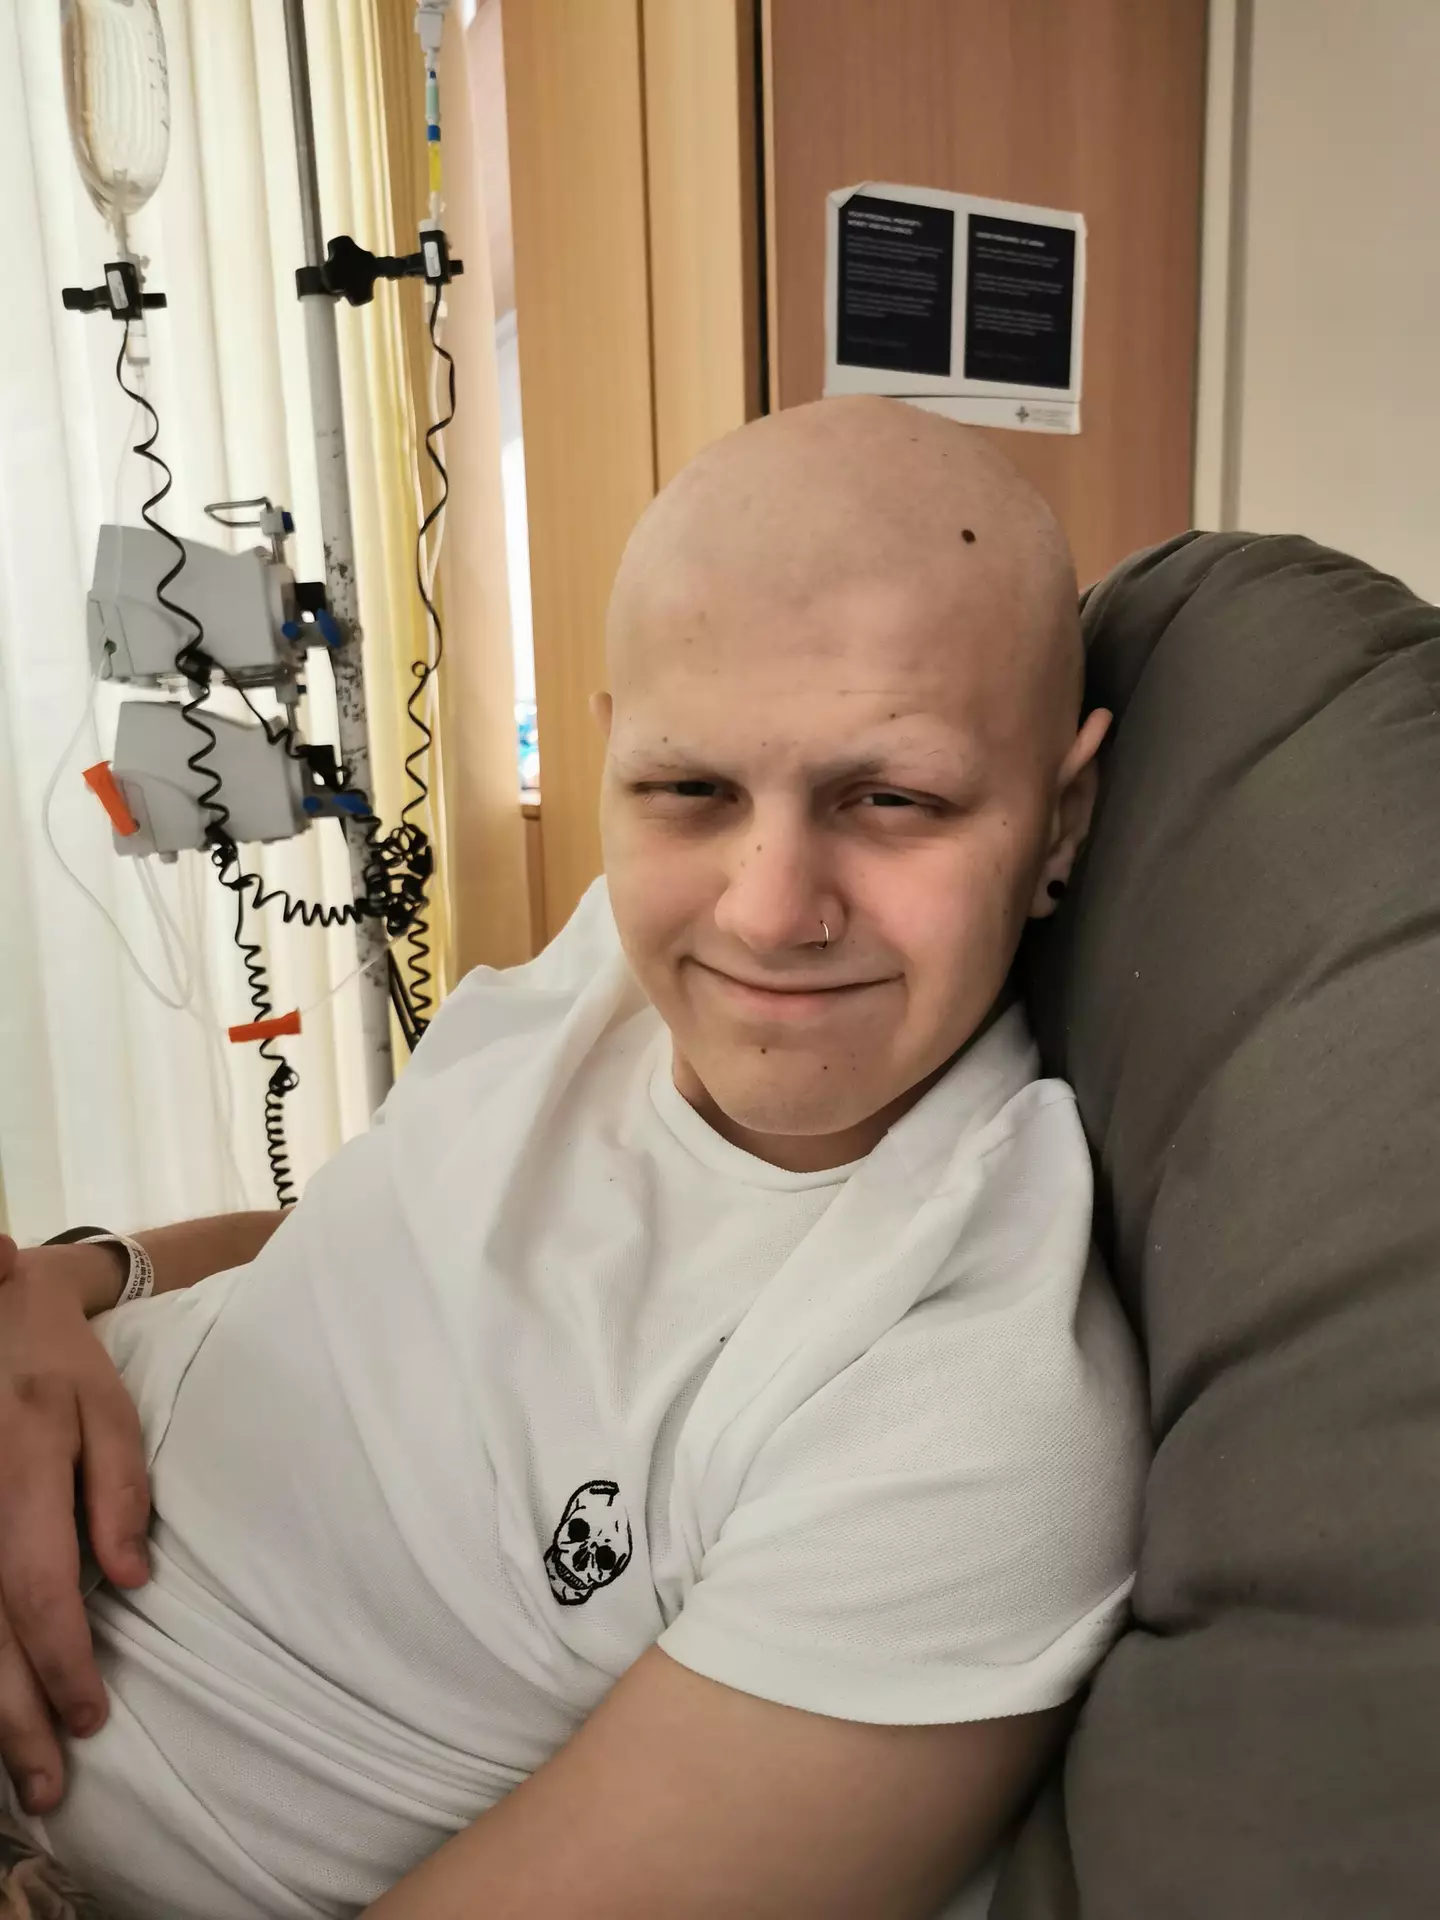 19 year old Rhys Langford has bone cancer osteosarcoma and only has between three and six months to live.